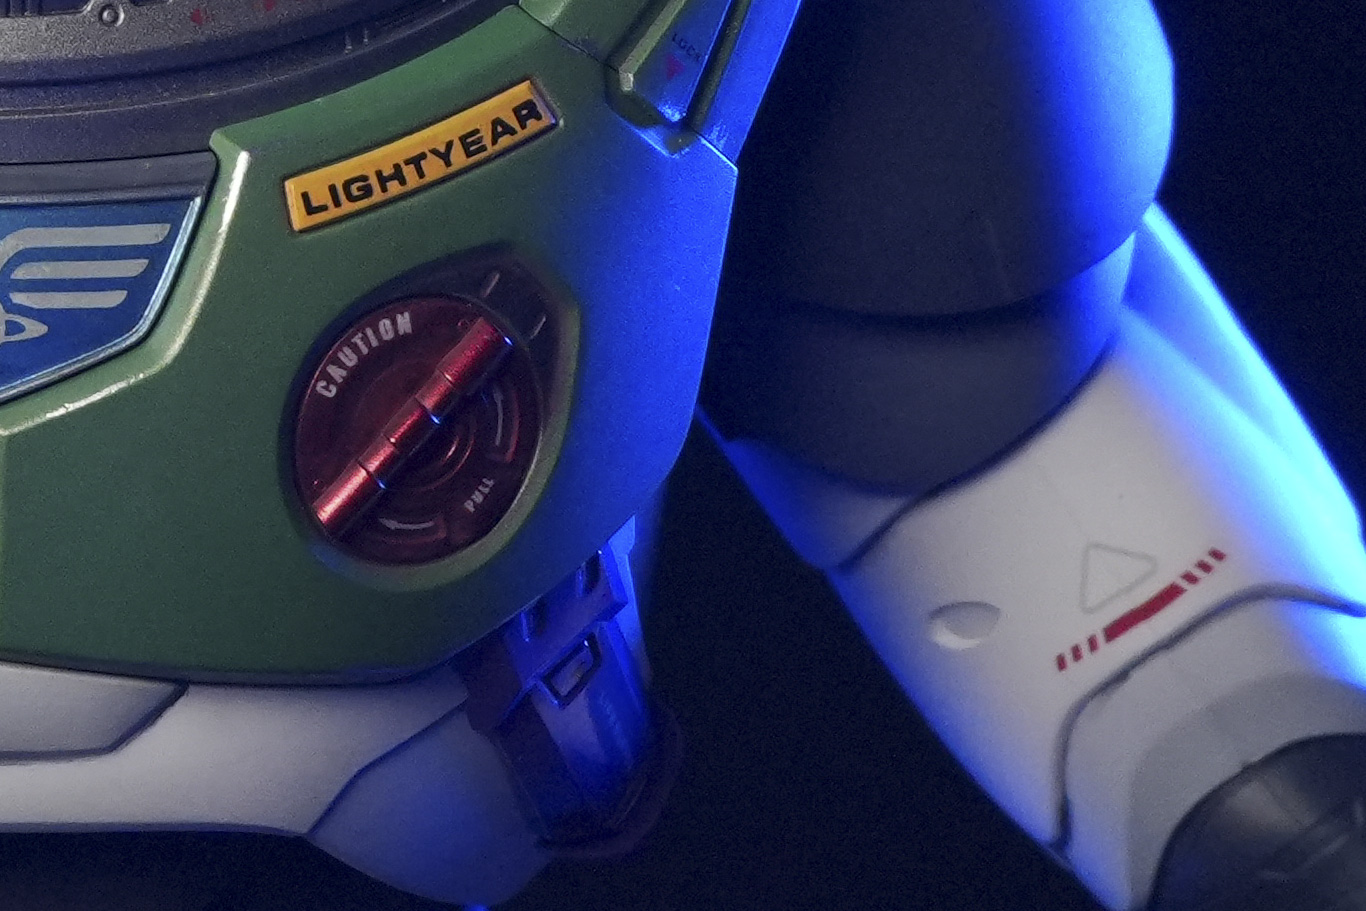 Sony ZV-E10 II sample images of buzz lightyear toy in dark studio taken at different ISO settings